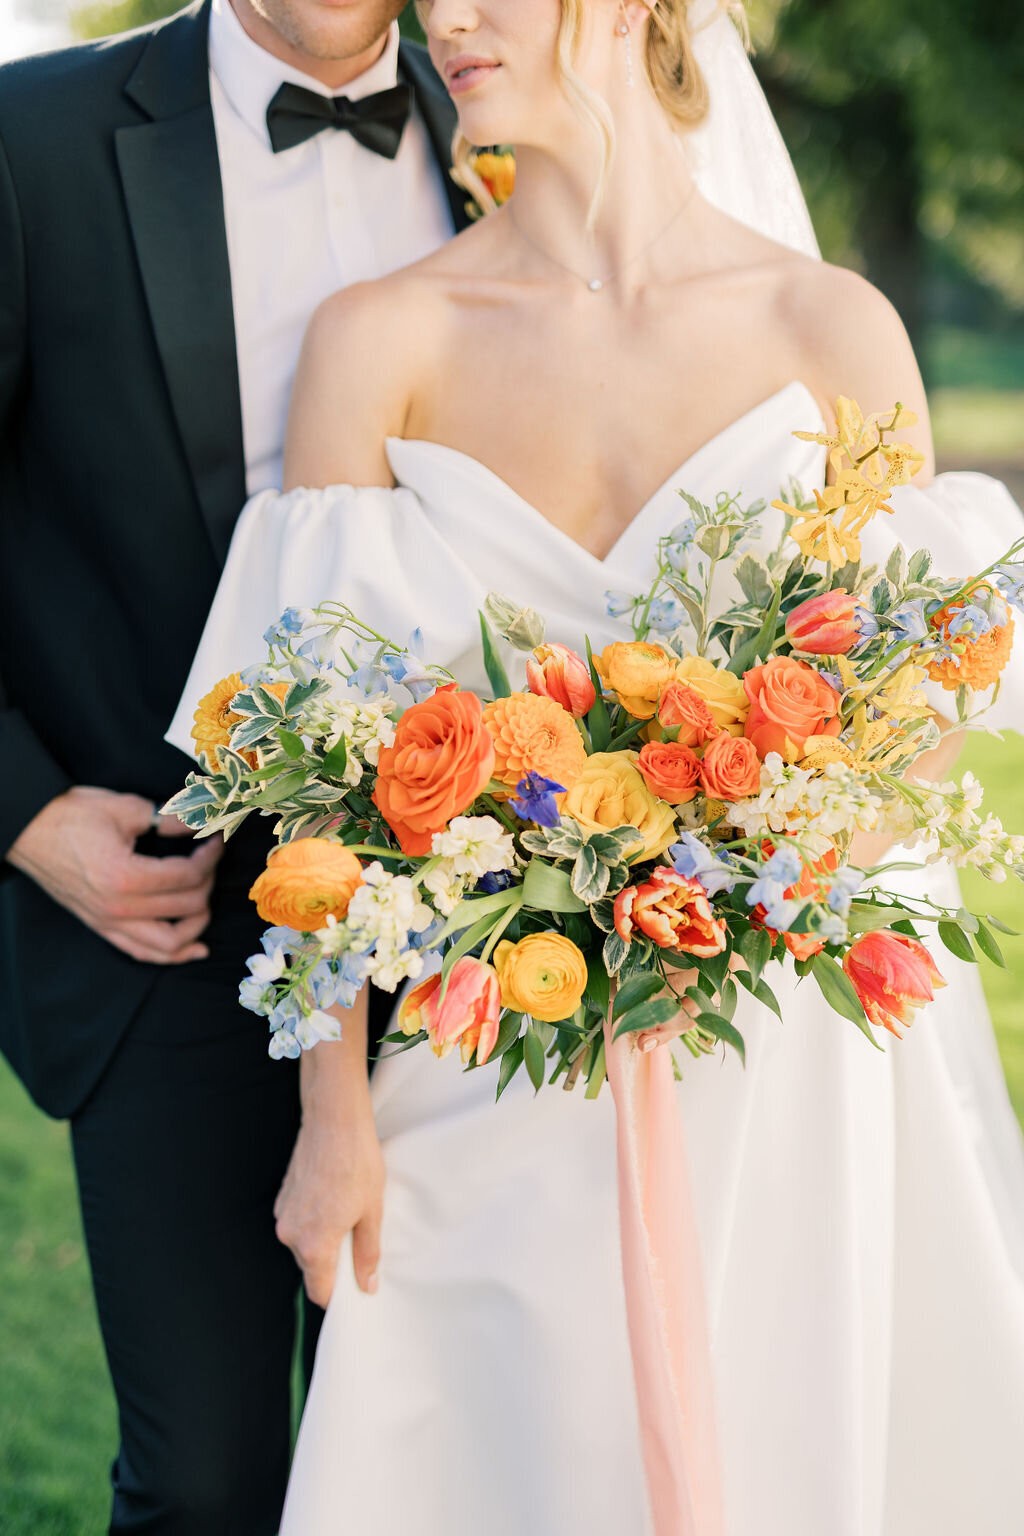 wedding bouquet with orange, yellow and blue flowers